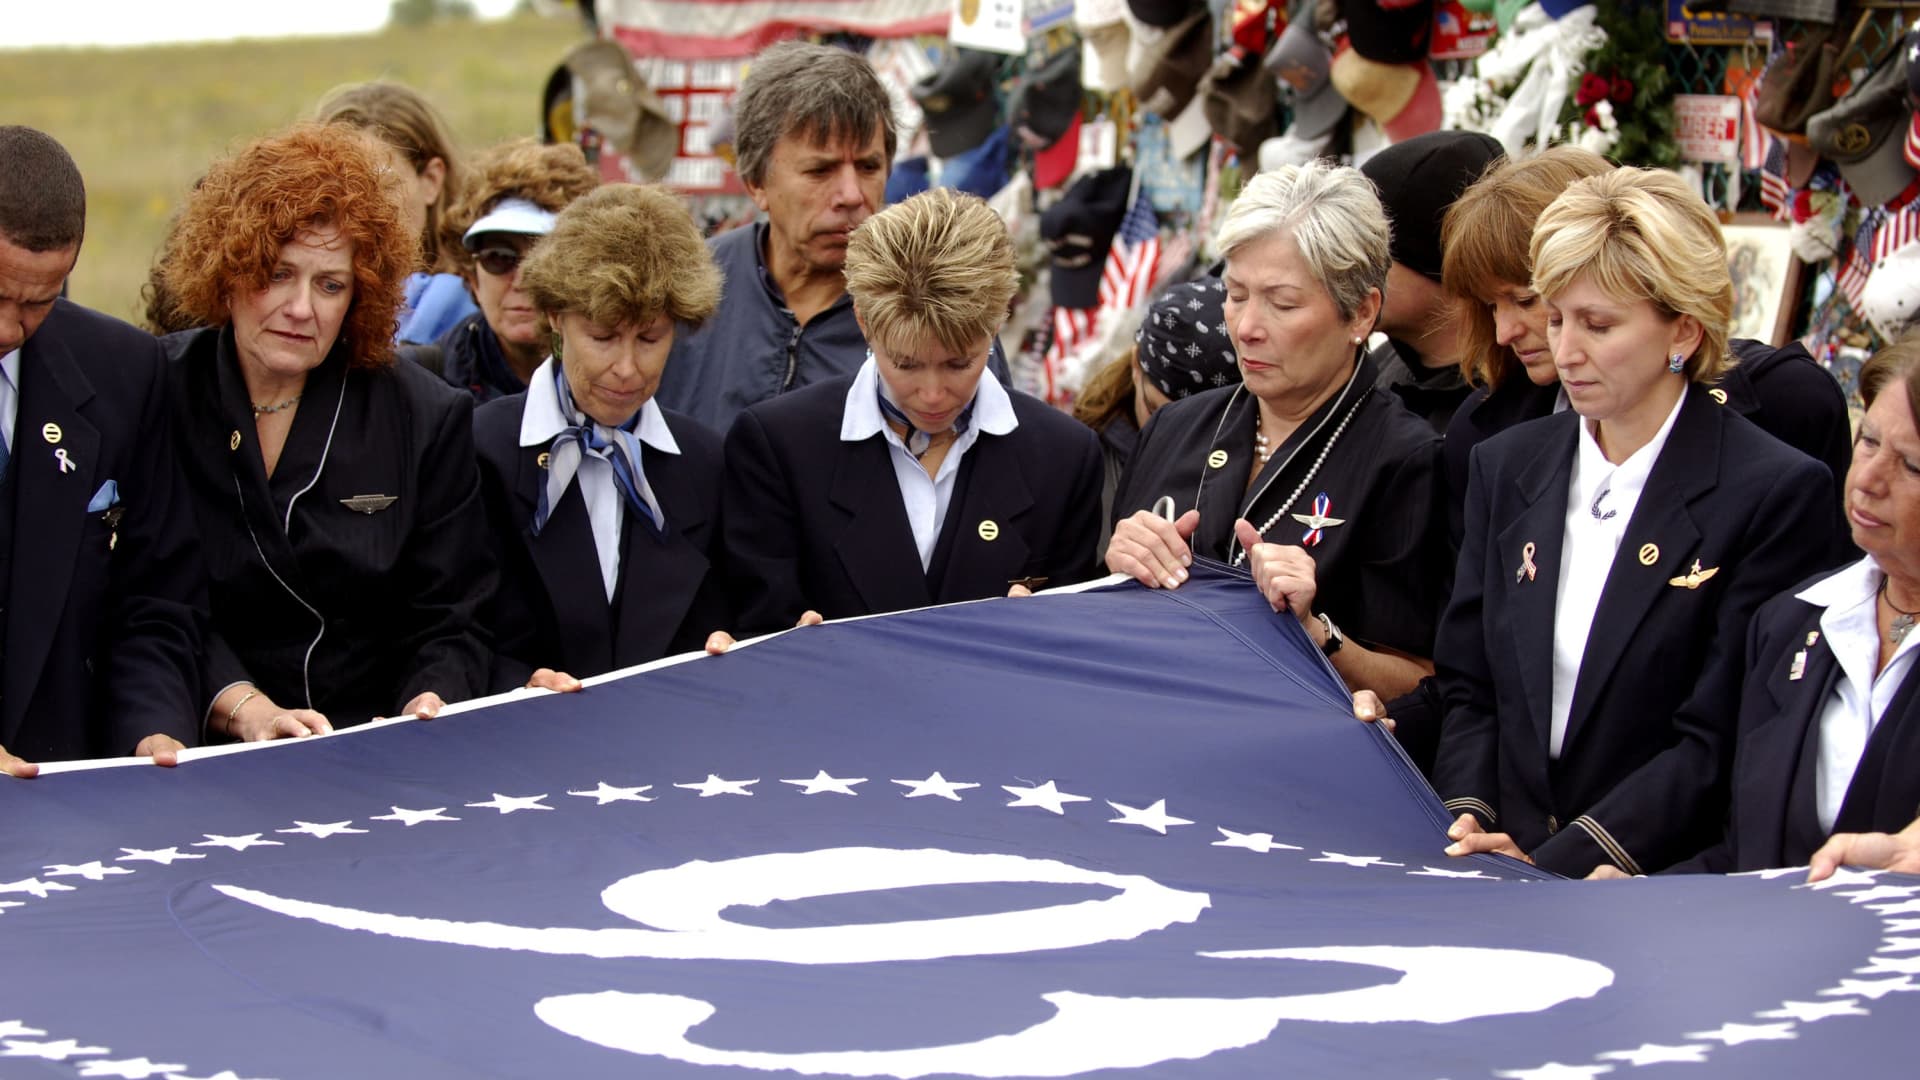 United Airlines flight attendants unfold a flag at a memorial site on the 5th anniversary of the September 11, 2001 attacks, where United Flight 93 crashed into a field in Shanksville, Pennsylvania, September 11, 2006.